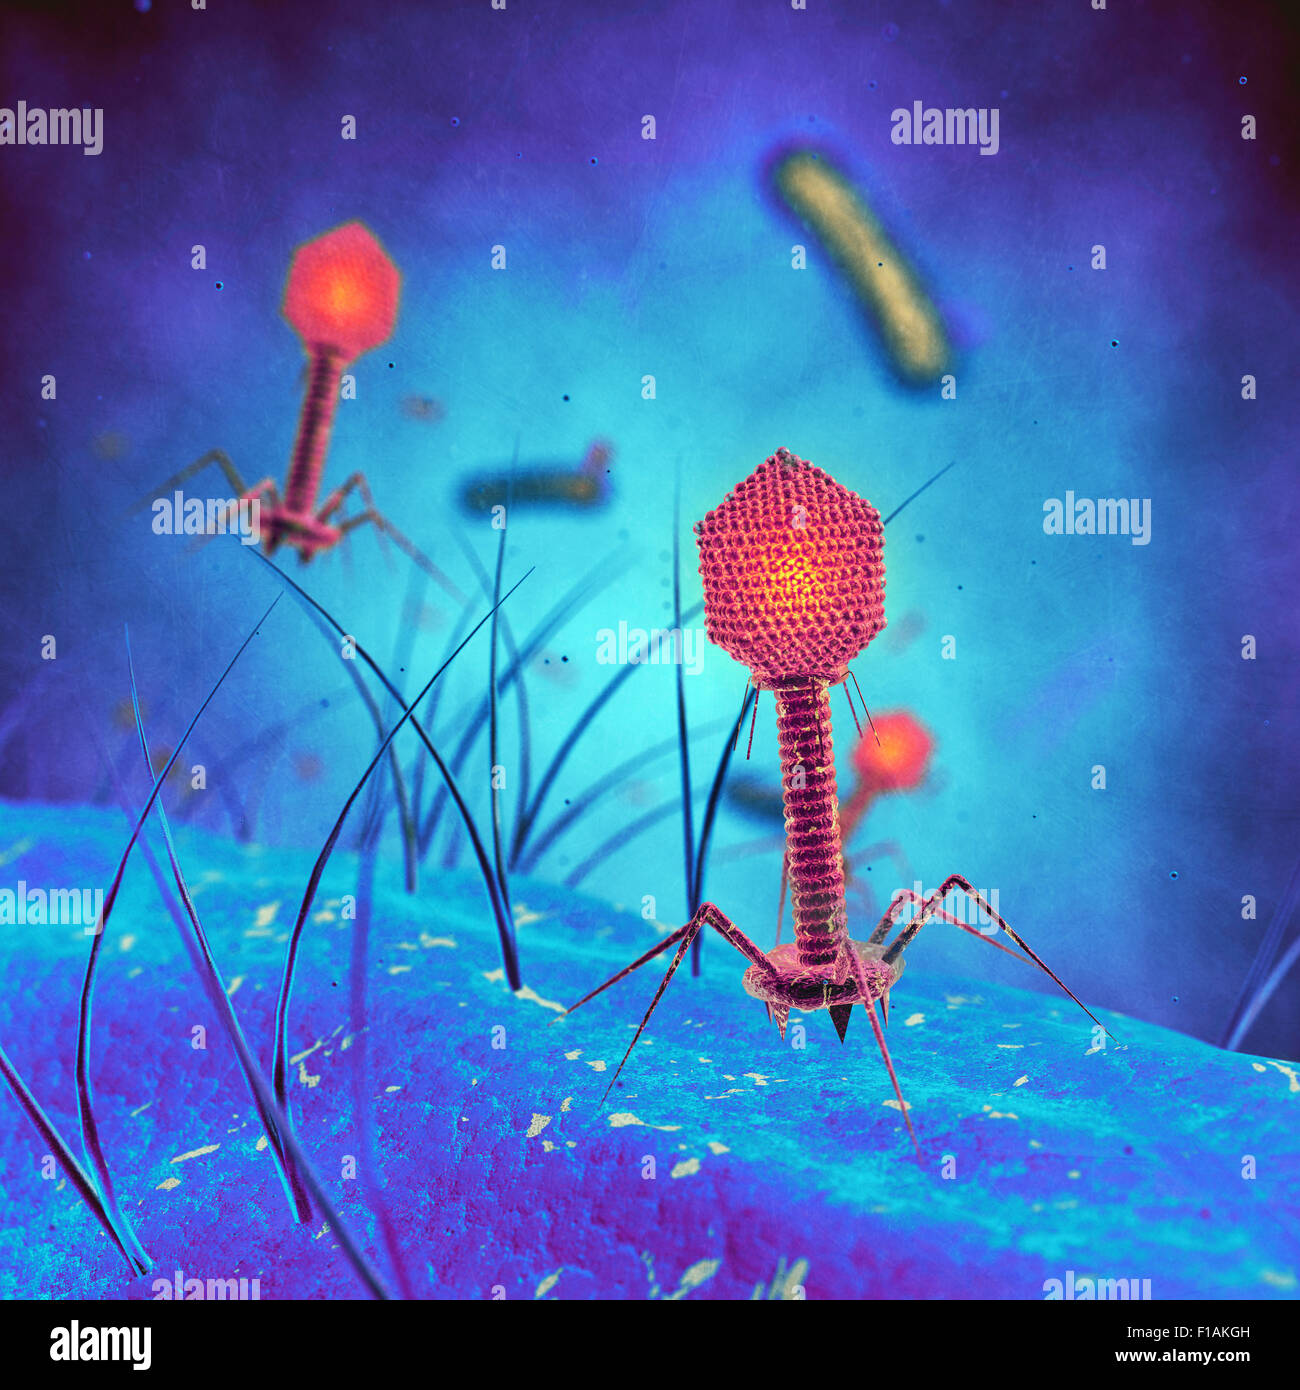 Bacteriophage viruses infecting bacterial cells Stock Photo